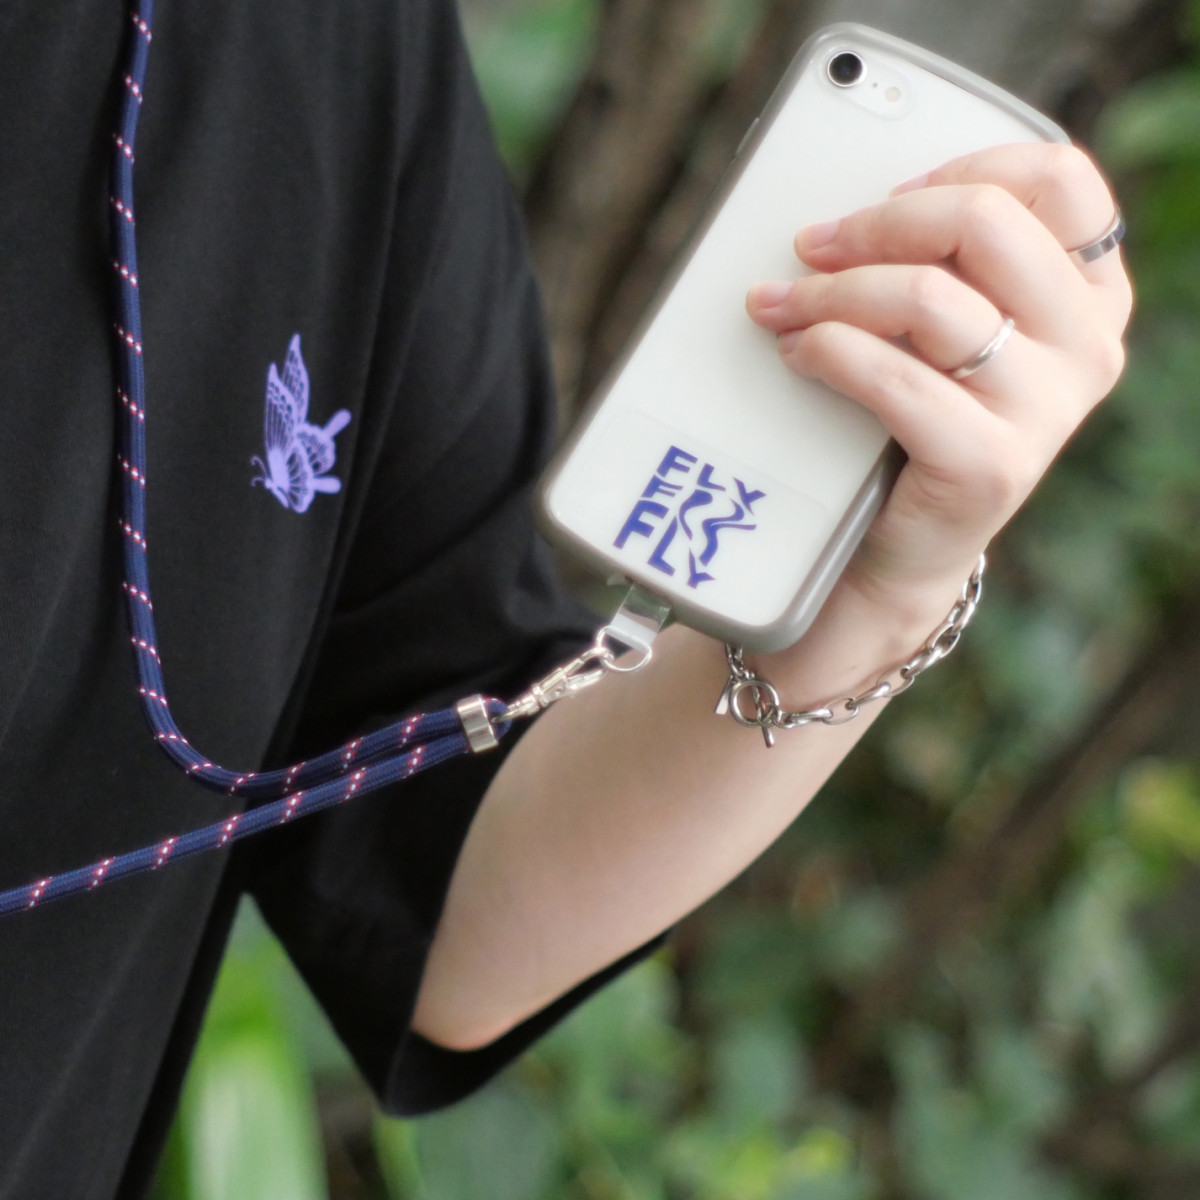 「FLY FLY FLY」 Smartphone strap